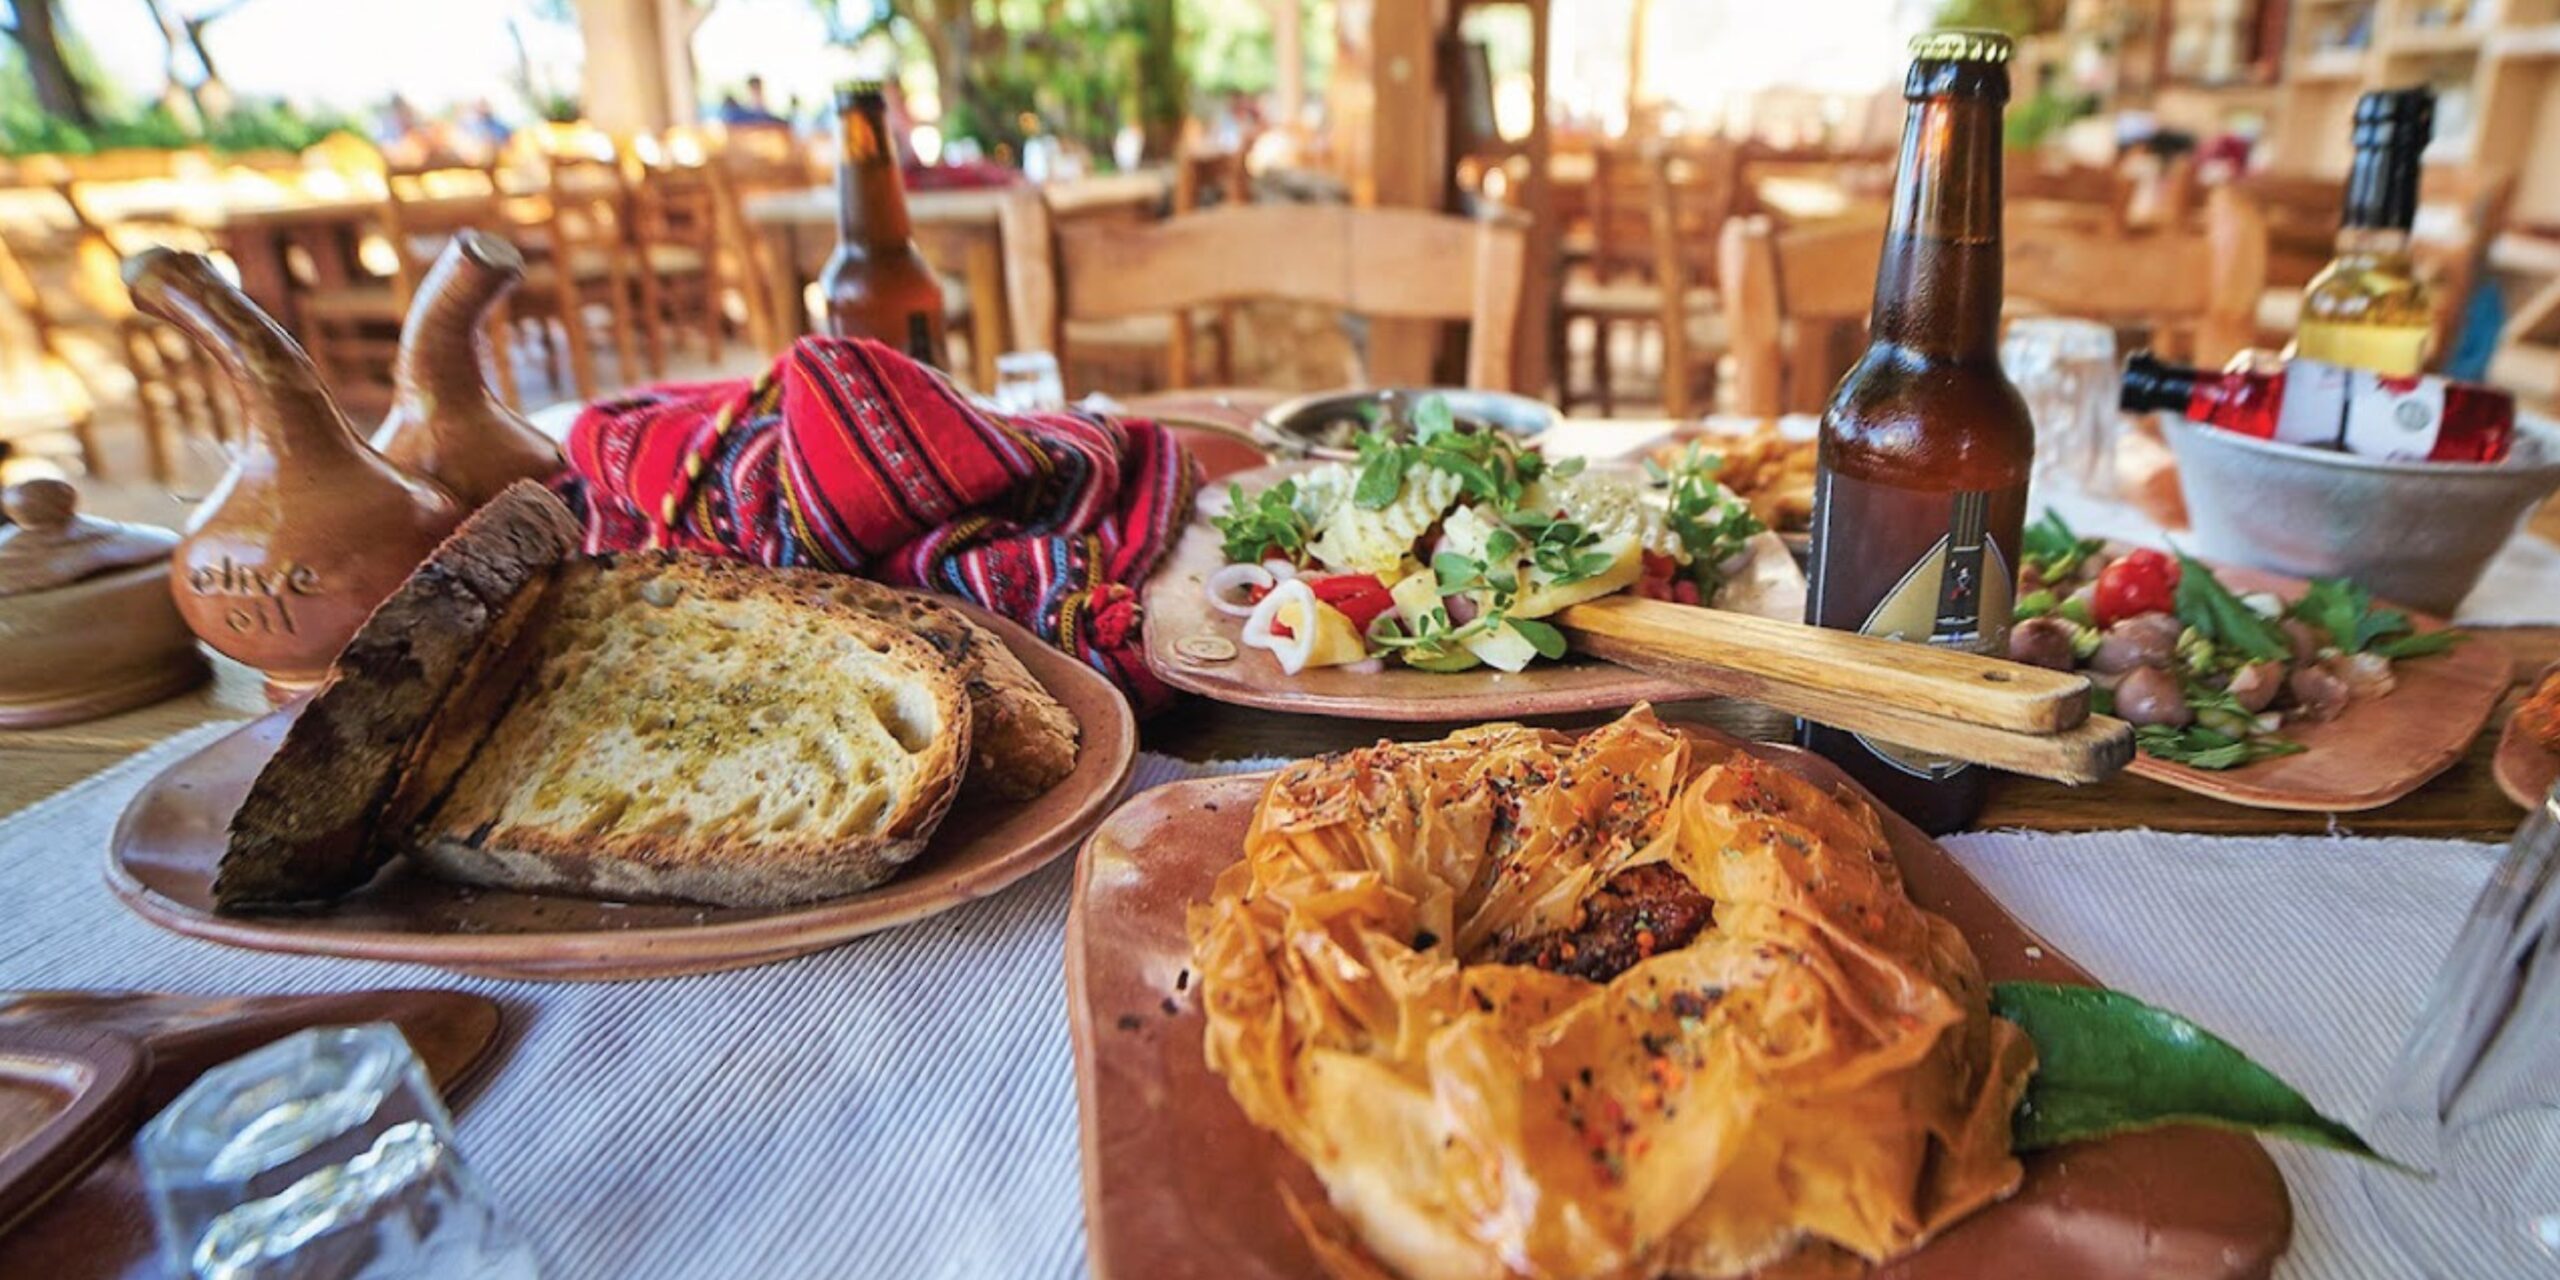 Table spread with various Greek dishes, bread, and a bottle of beer at a taverna.